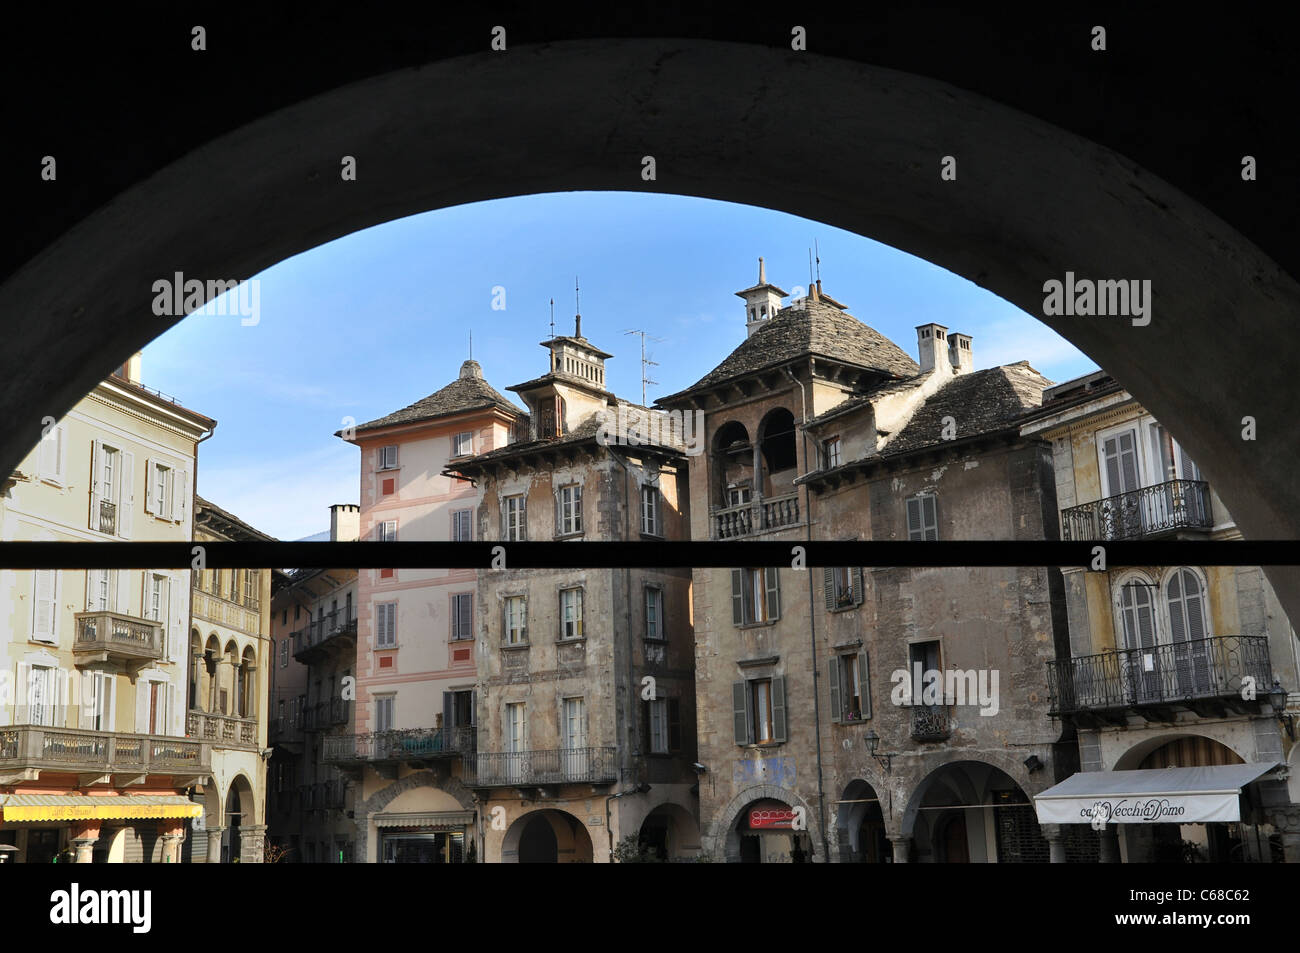 Piazza Mercato in the center town of Domodossola with its old buildings viewed from the side colonnade, Verbania, Italy Stock Photo